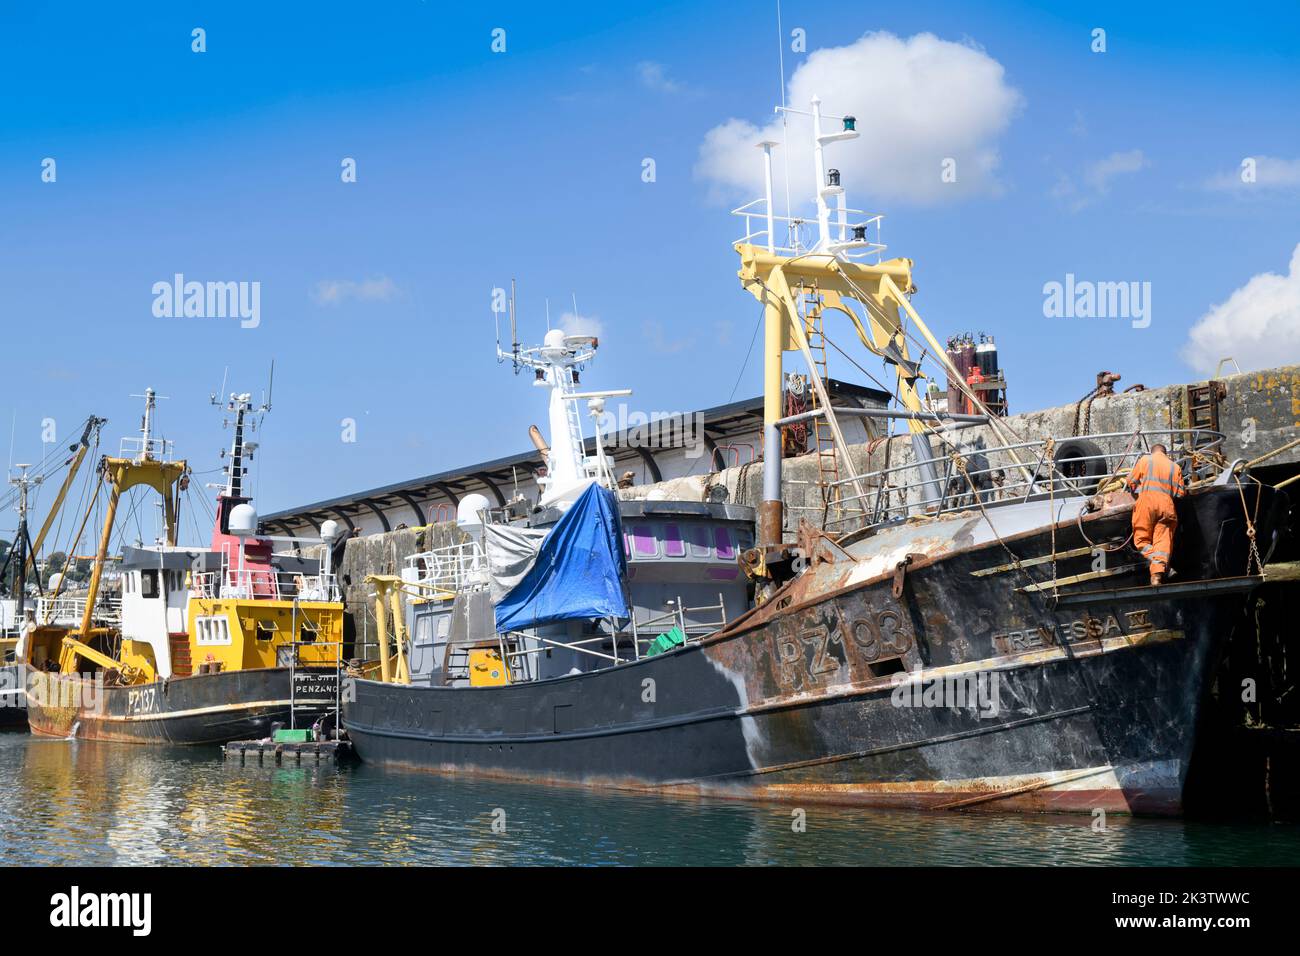 A trawler being repaired at Newlyn harbour in Cornwall, UK Stock Photo